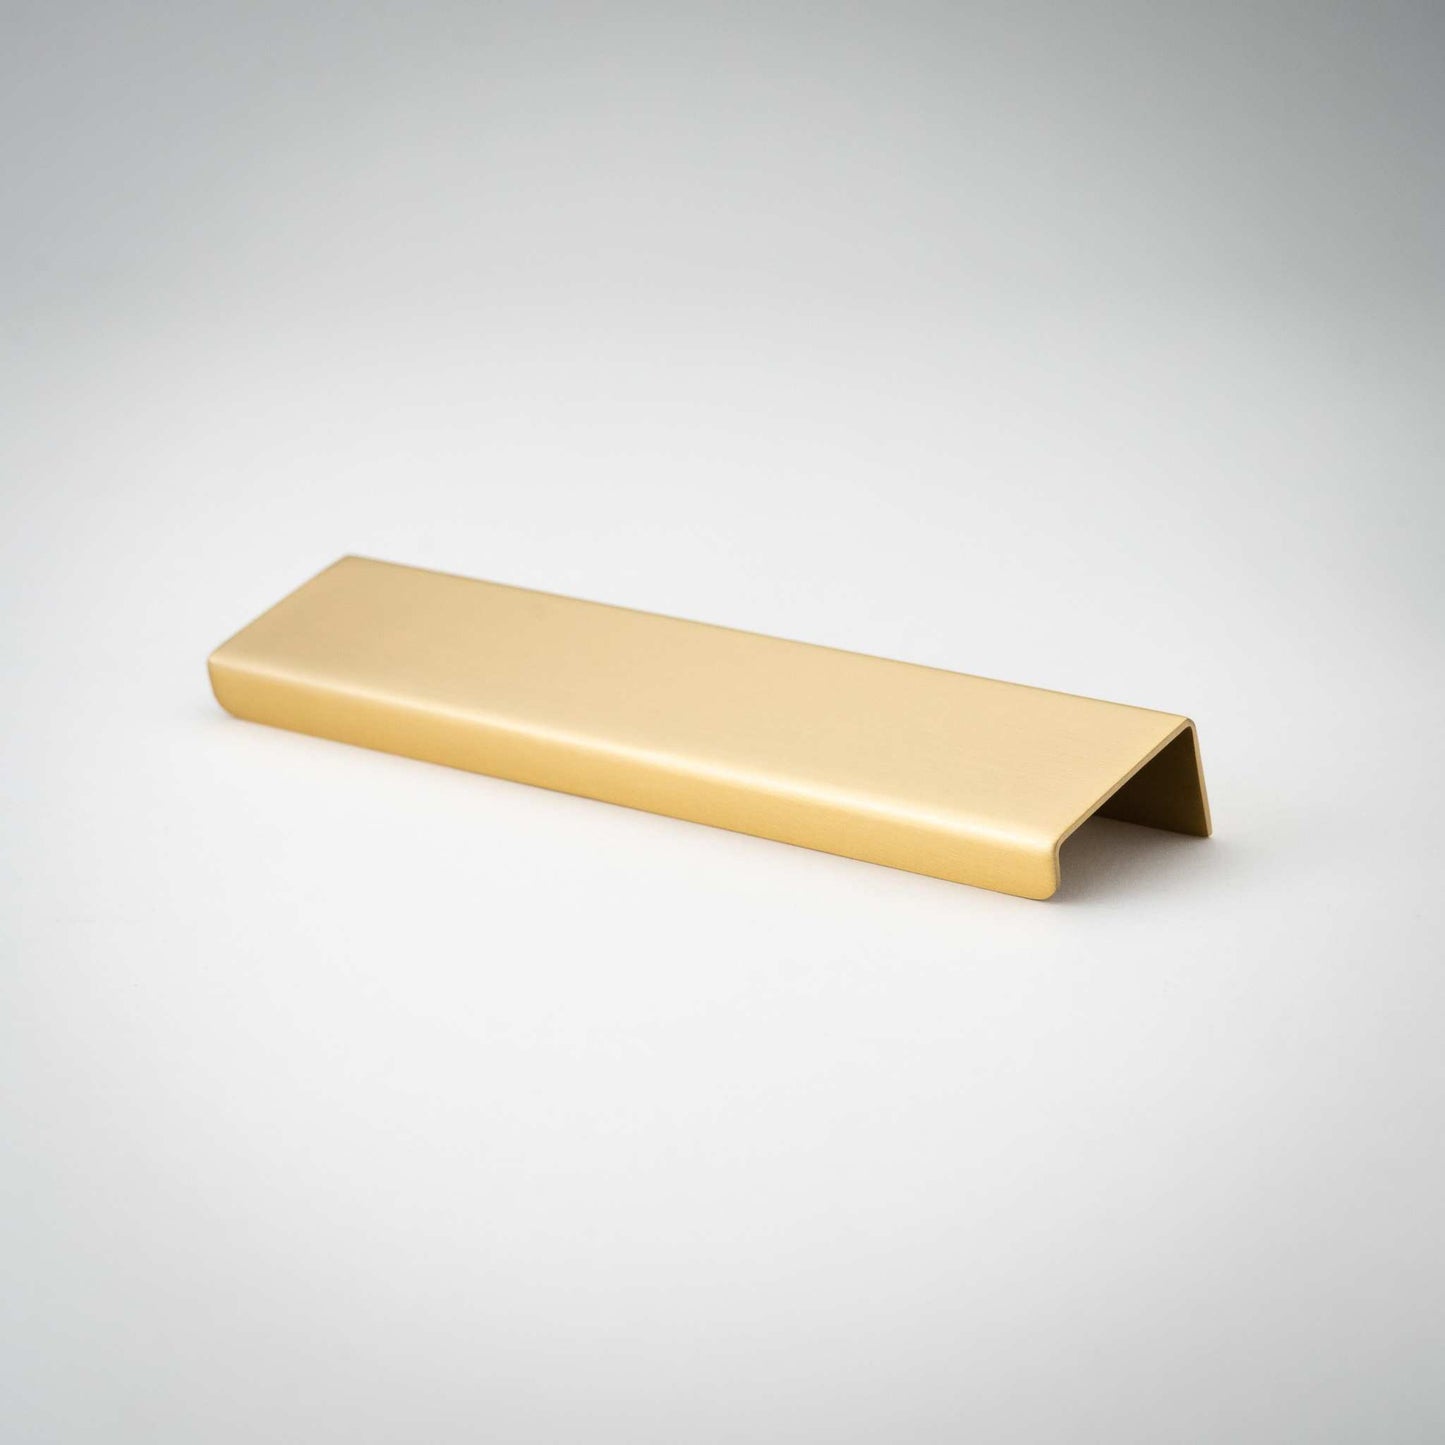 Verge, Solid Brass Edge Pulls


Meet our new line of Verge Edge Pulls.  Similar in weight and feel to our Grip Edge pull, but now available at more accessible price. The solid and heavy brass copullVerge, Solid Brass Edge Pulls